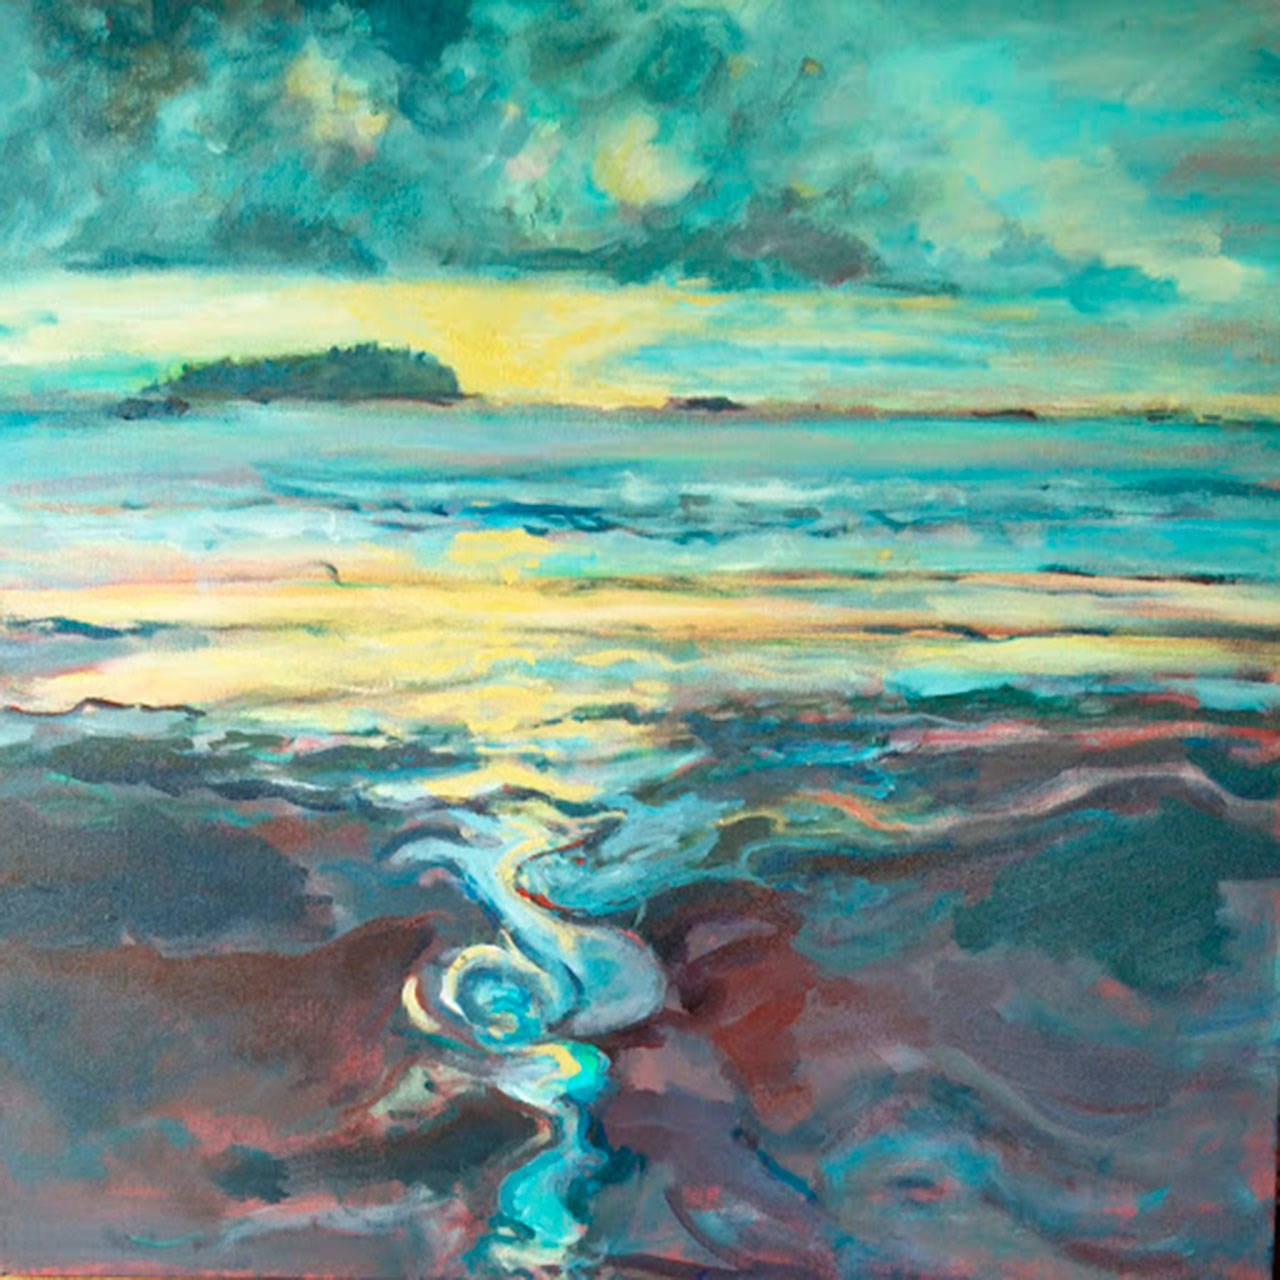 “Beach 2” by Lynne Armstrong, one of two featured artists at the Blue Whole Gallery in August. Submitted art